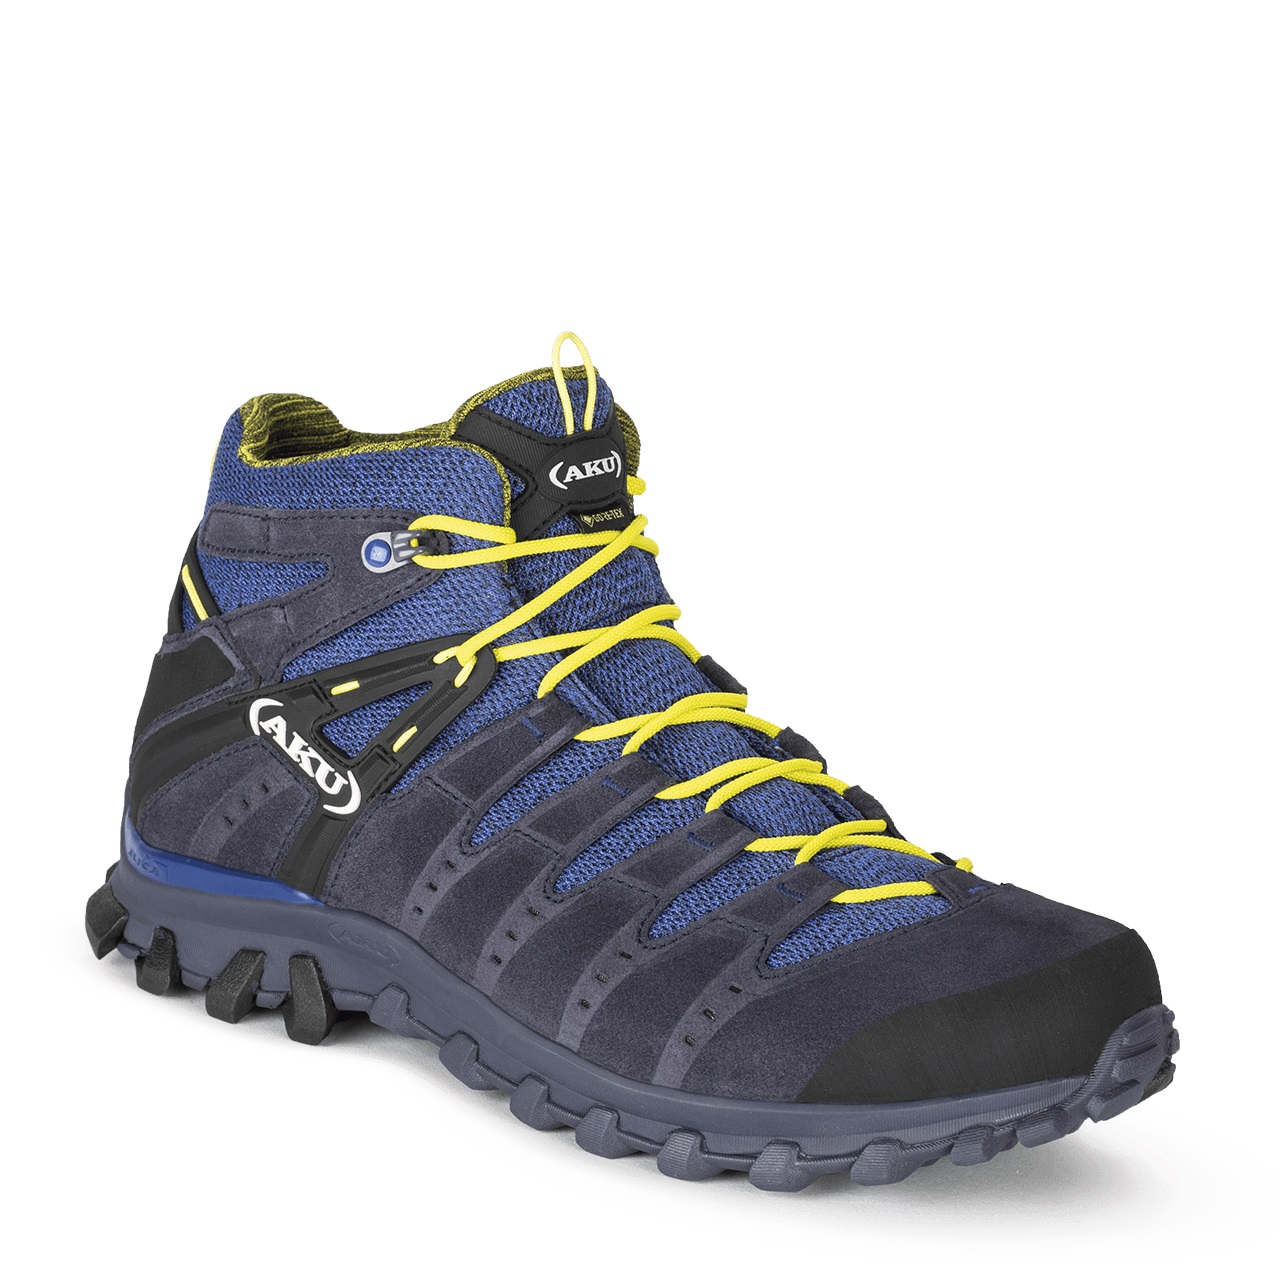 Minachting Investeren dubbel How to choose Alpine Hiking Boots - No. 1 Ultimate Tutorial